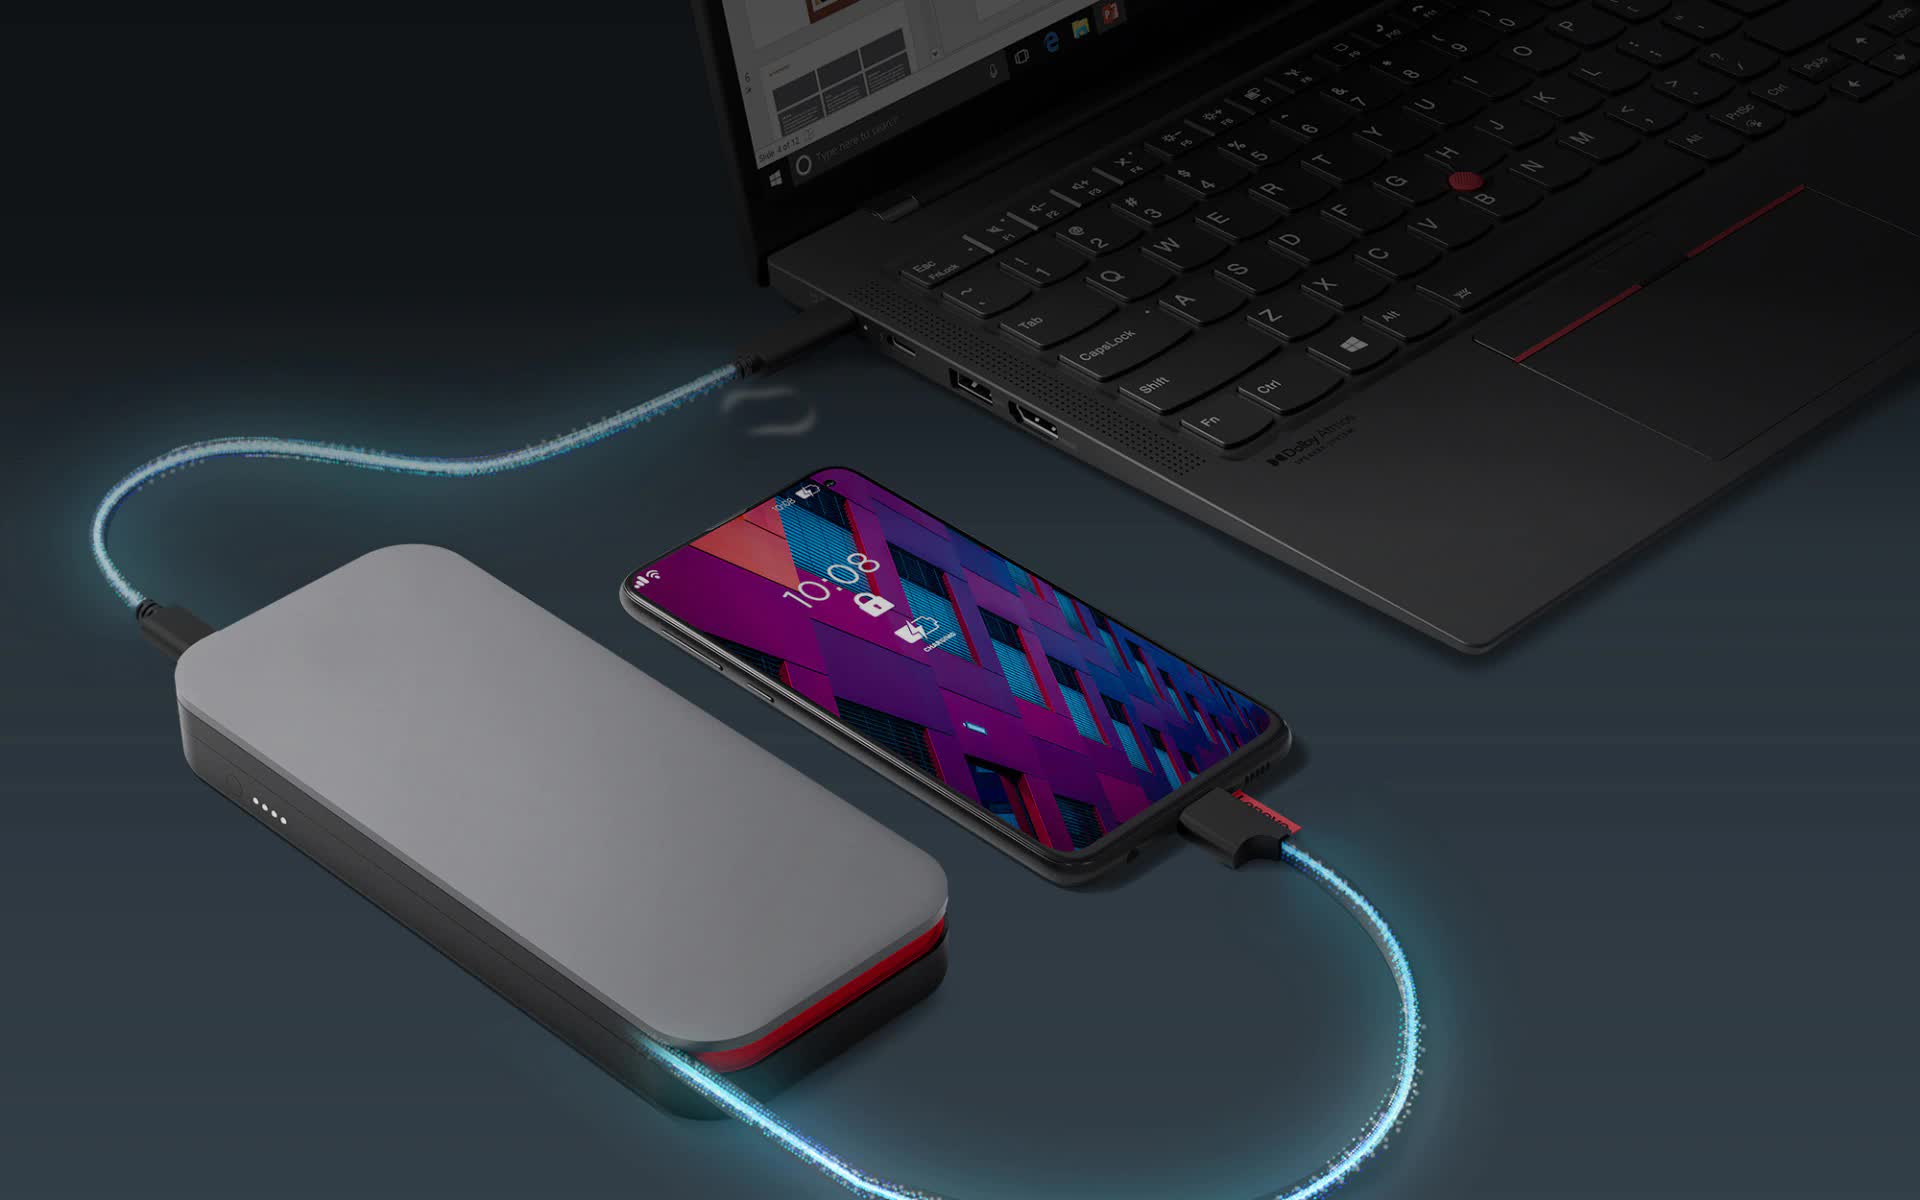 Lenovo issues recall for USB-C power banks due to fire hazard, here are the affected units